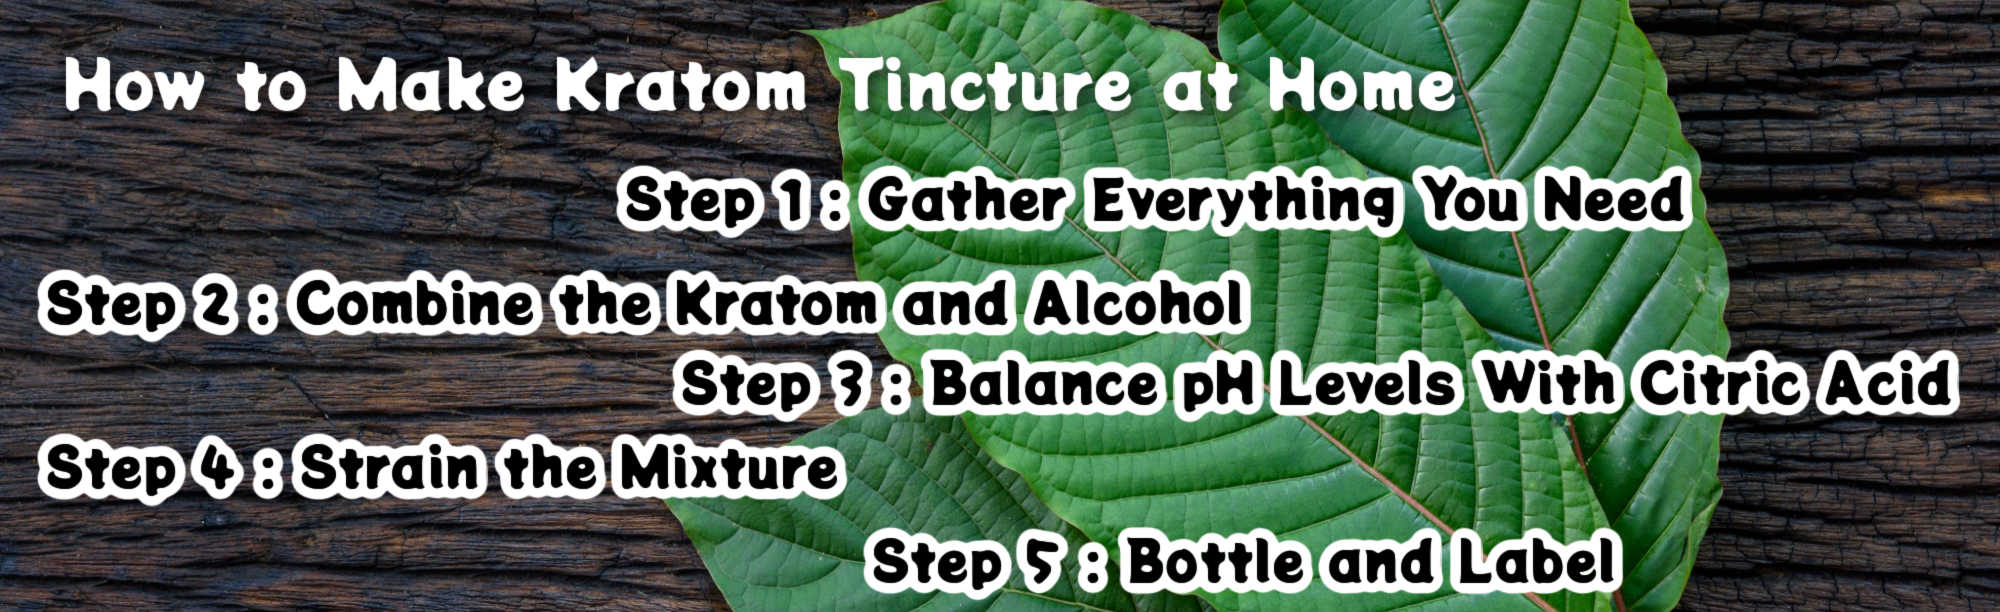 image of how to make kratom tincture at home